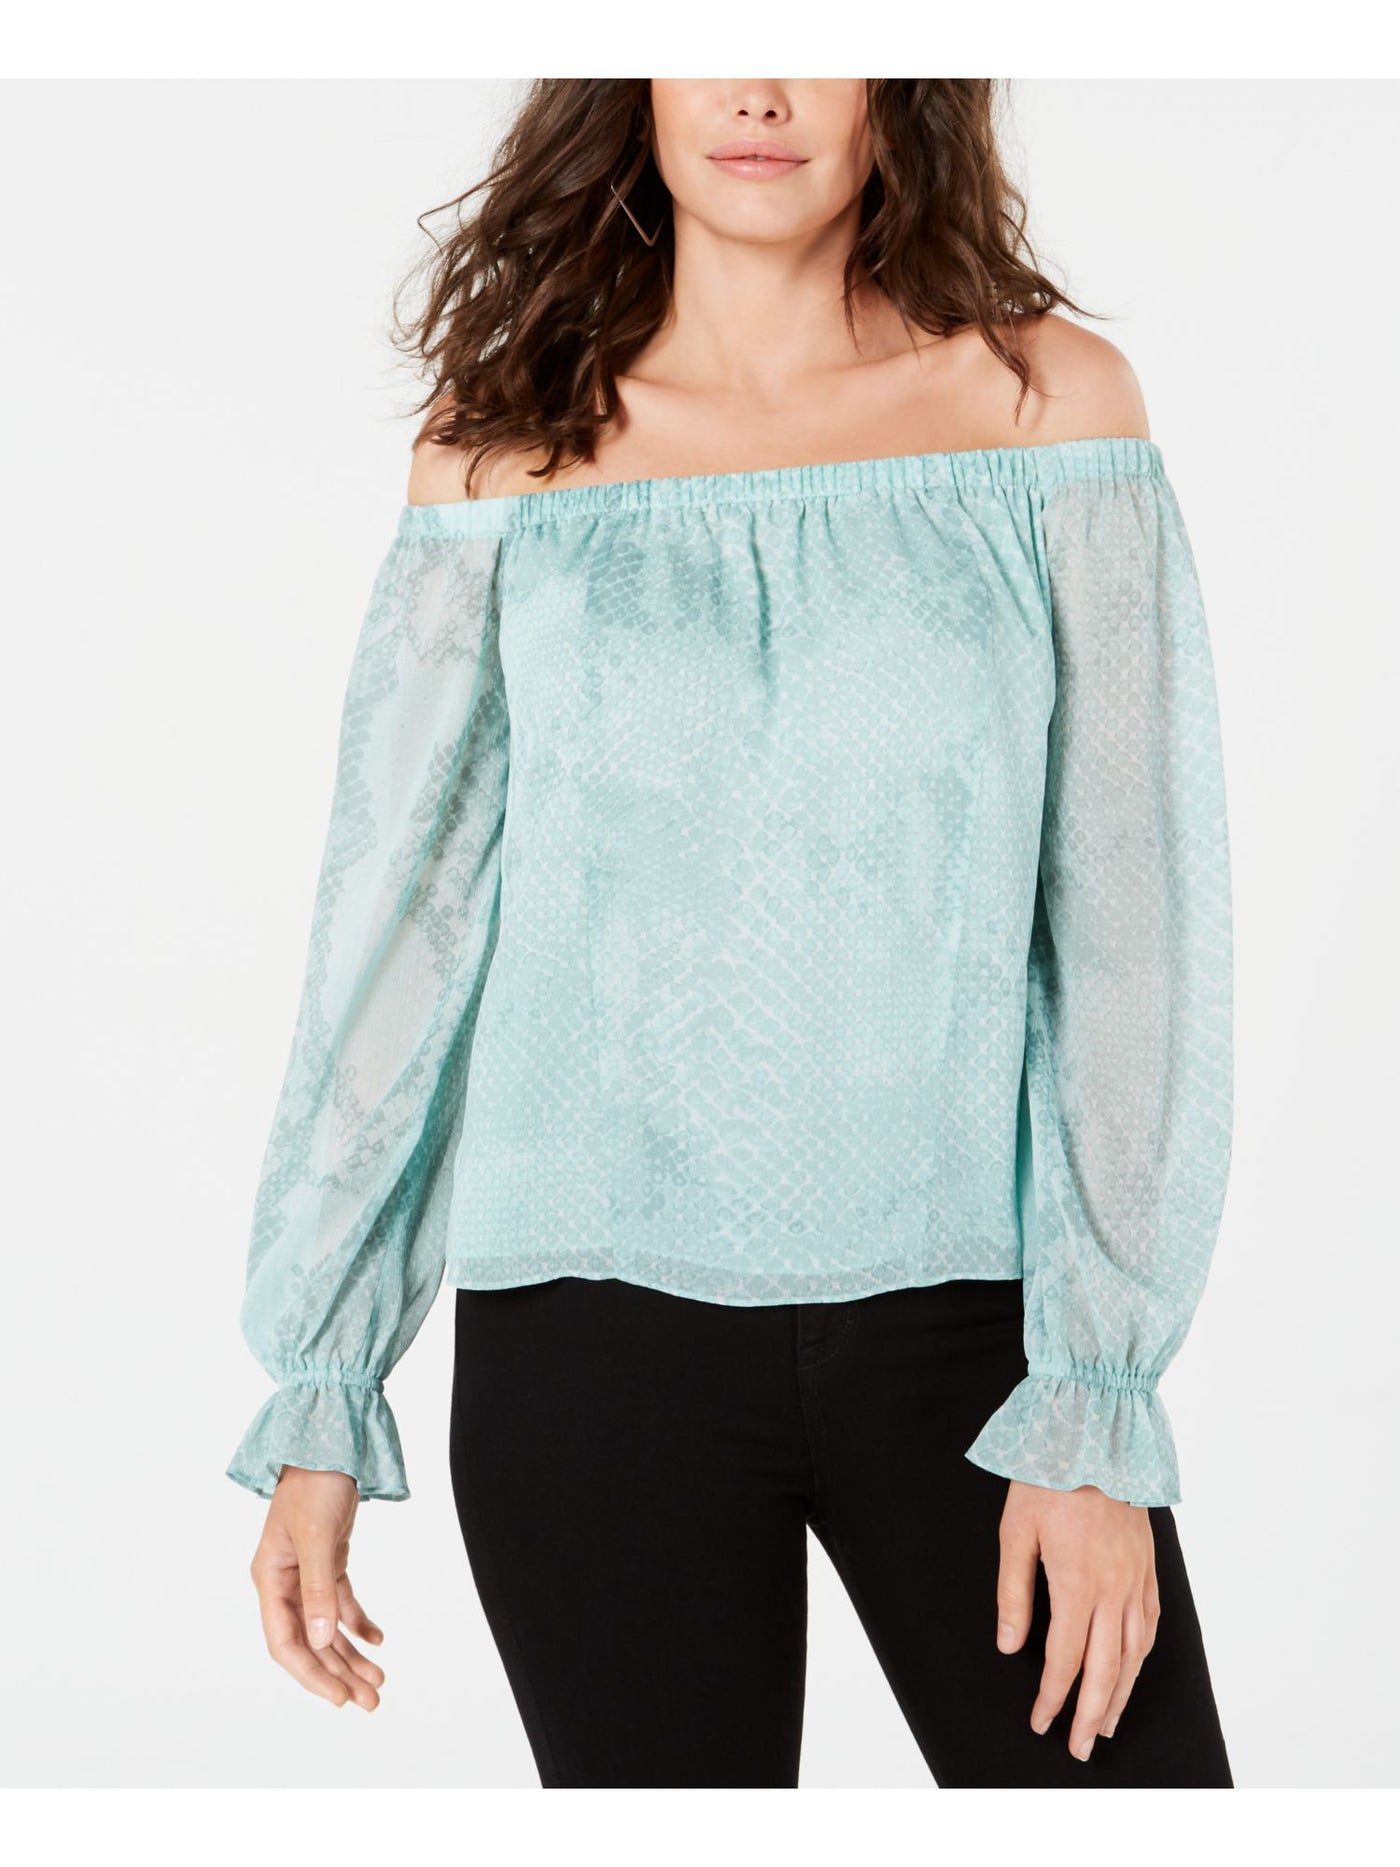 GUESS Womens Turquoise Patterned Long Sleeve Off Shoulder Blouse S